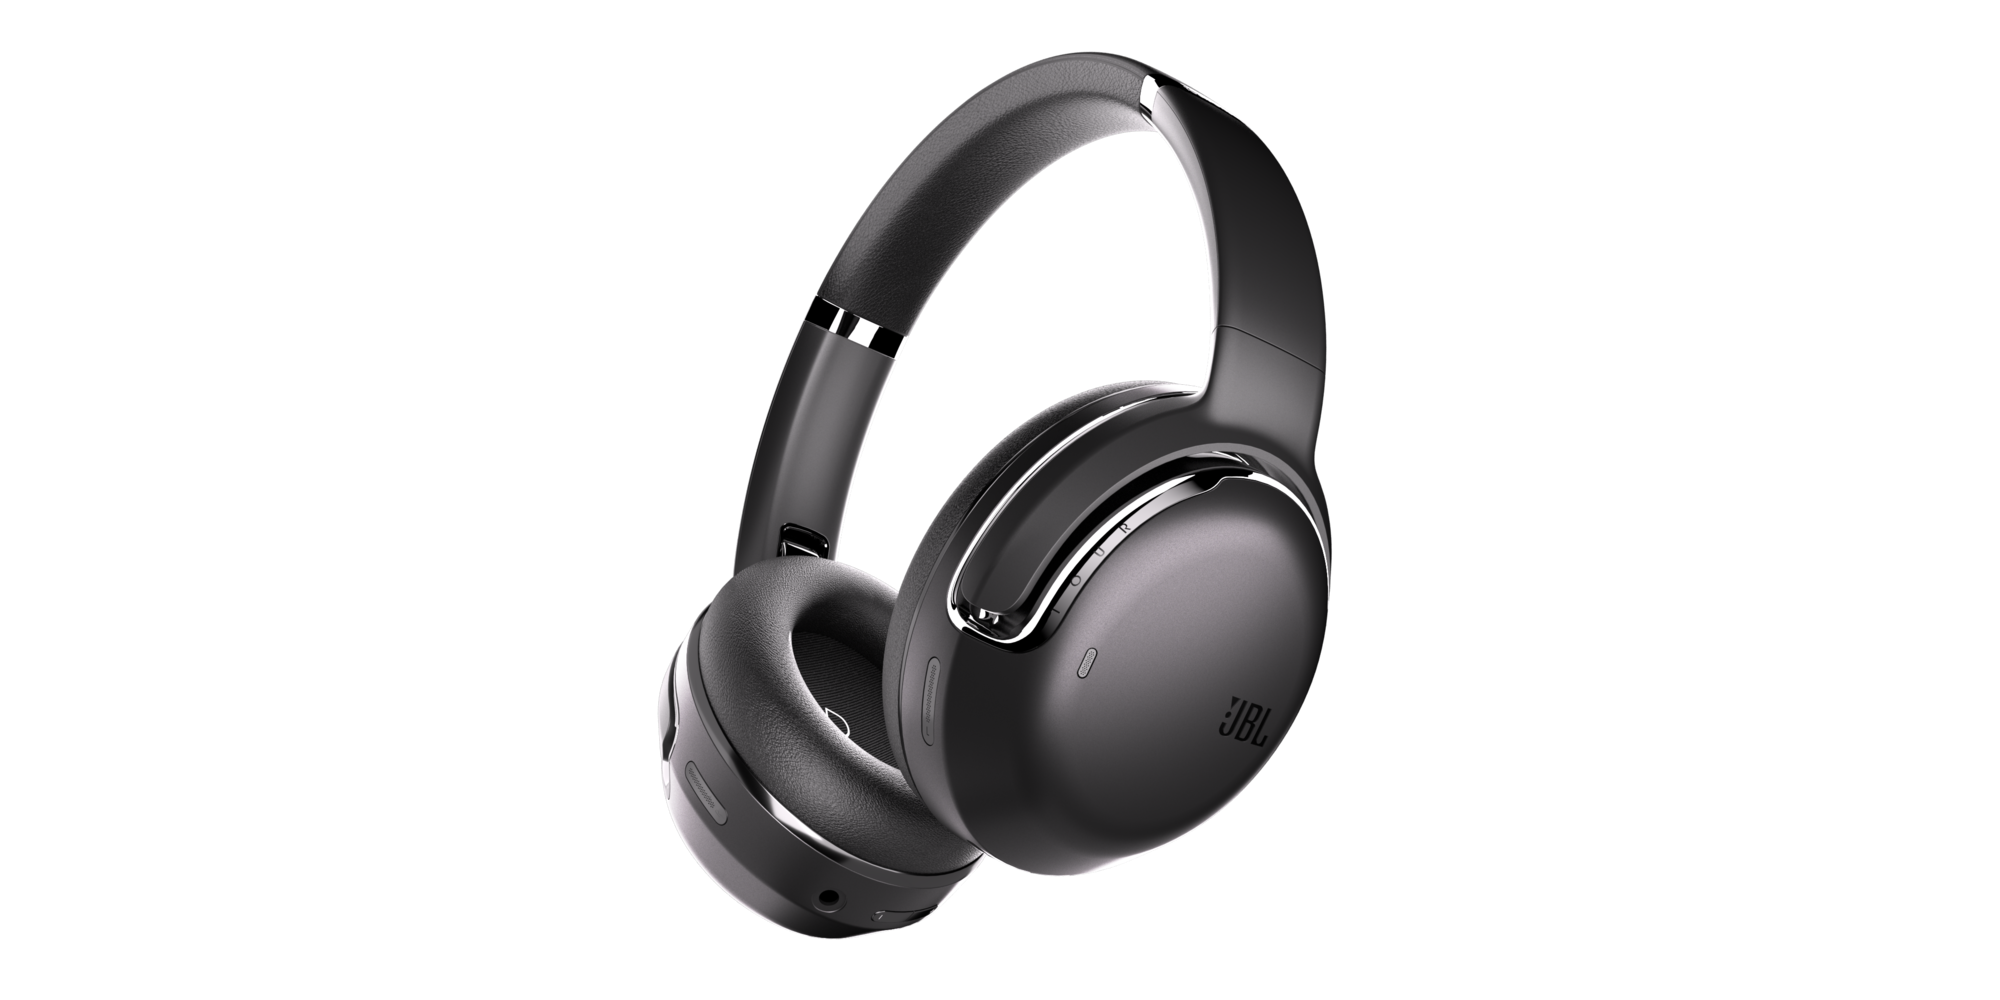 JBL Tour One M2 Wireless Bluetooth Over-Ear Noise Cancelling